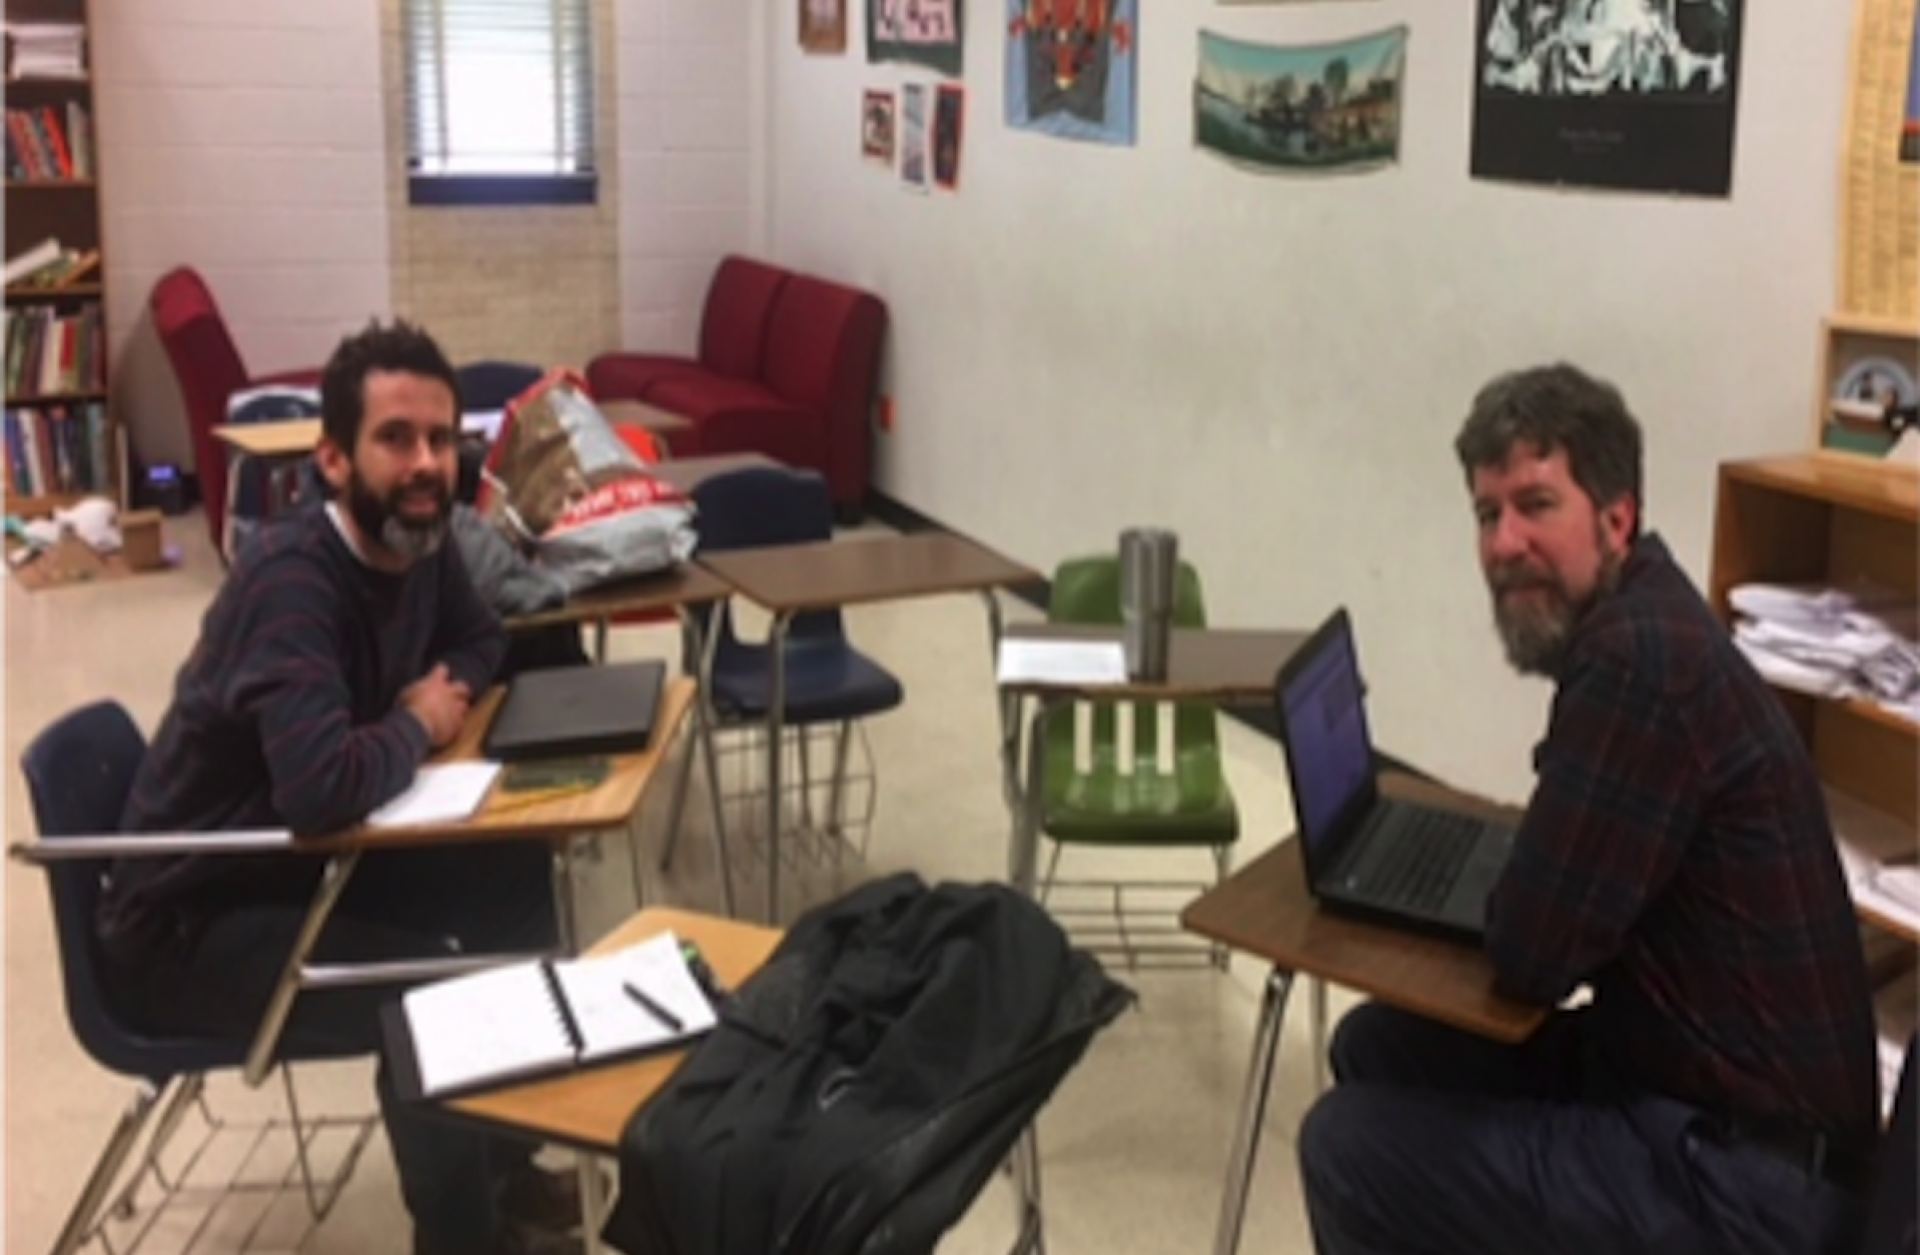 Austin's LASA high school teachers, Neil Lowenstein and Cody Moody (pictured left), generously share the details of their student project.